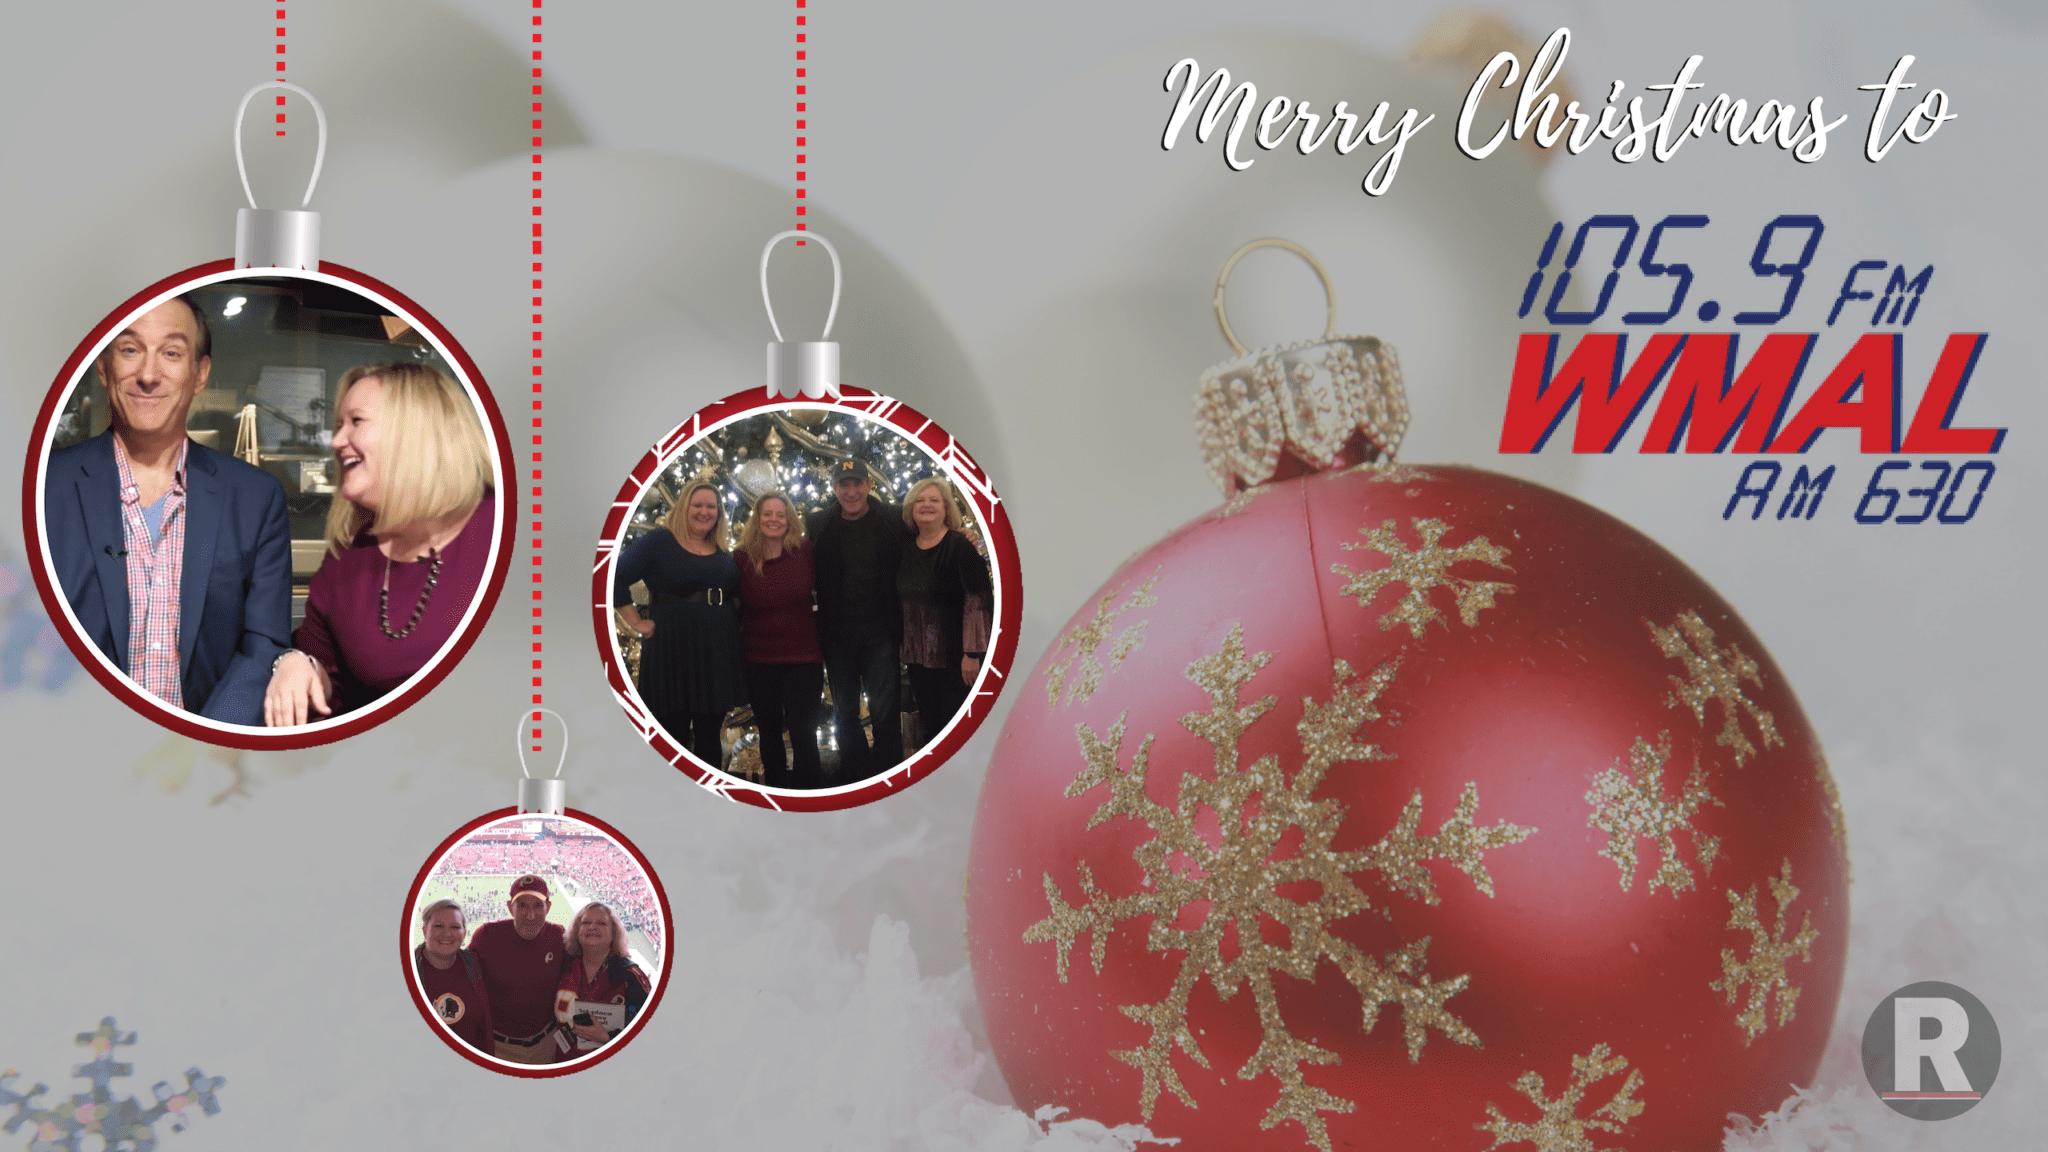 Merry Christmas to Larry O’Connor and the WMAL family!